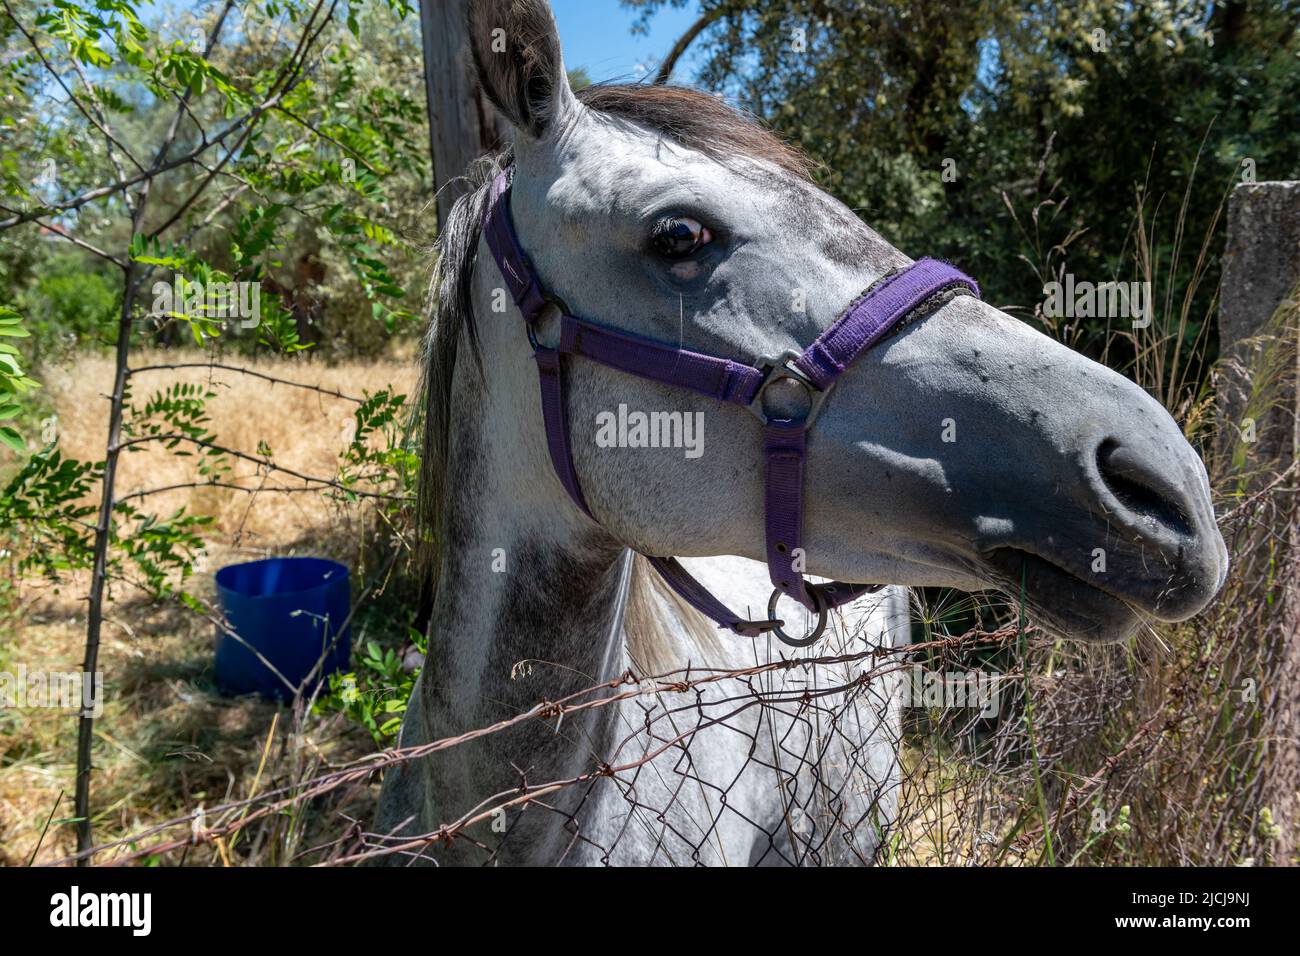 A close up of the head of a horse in a field. Stock Photo